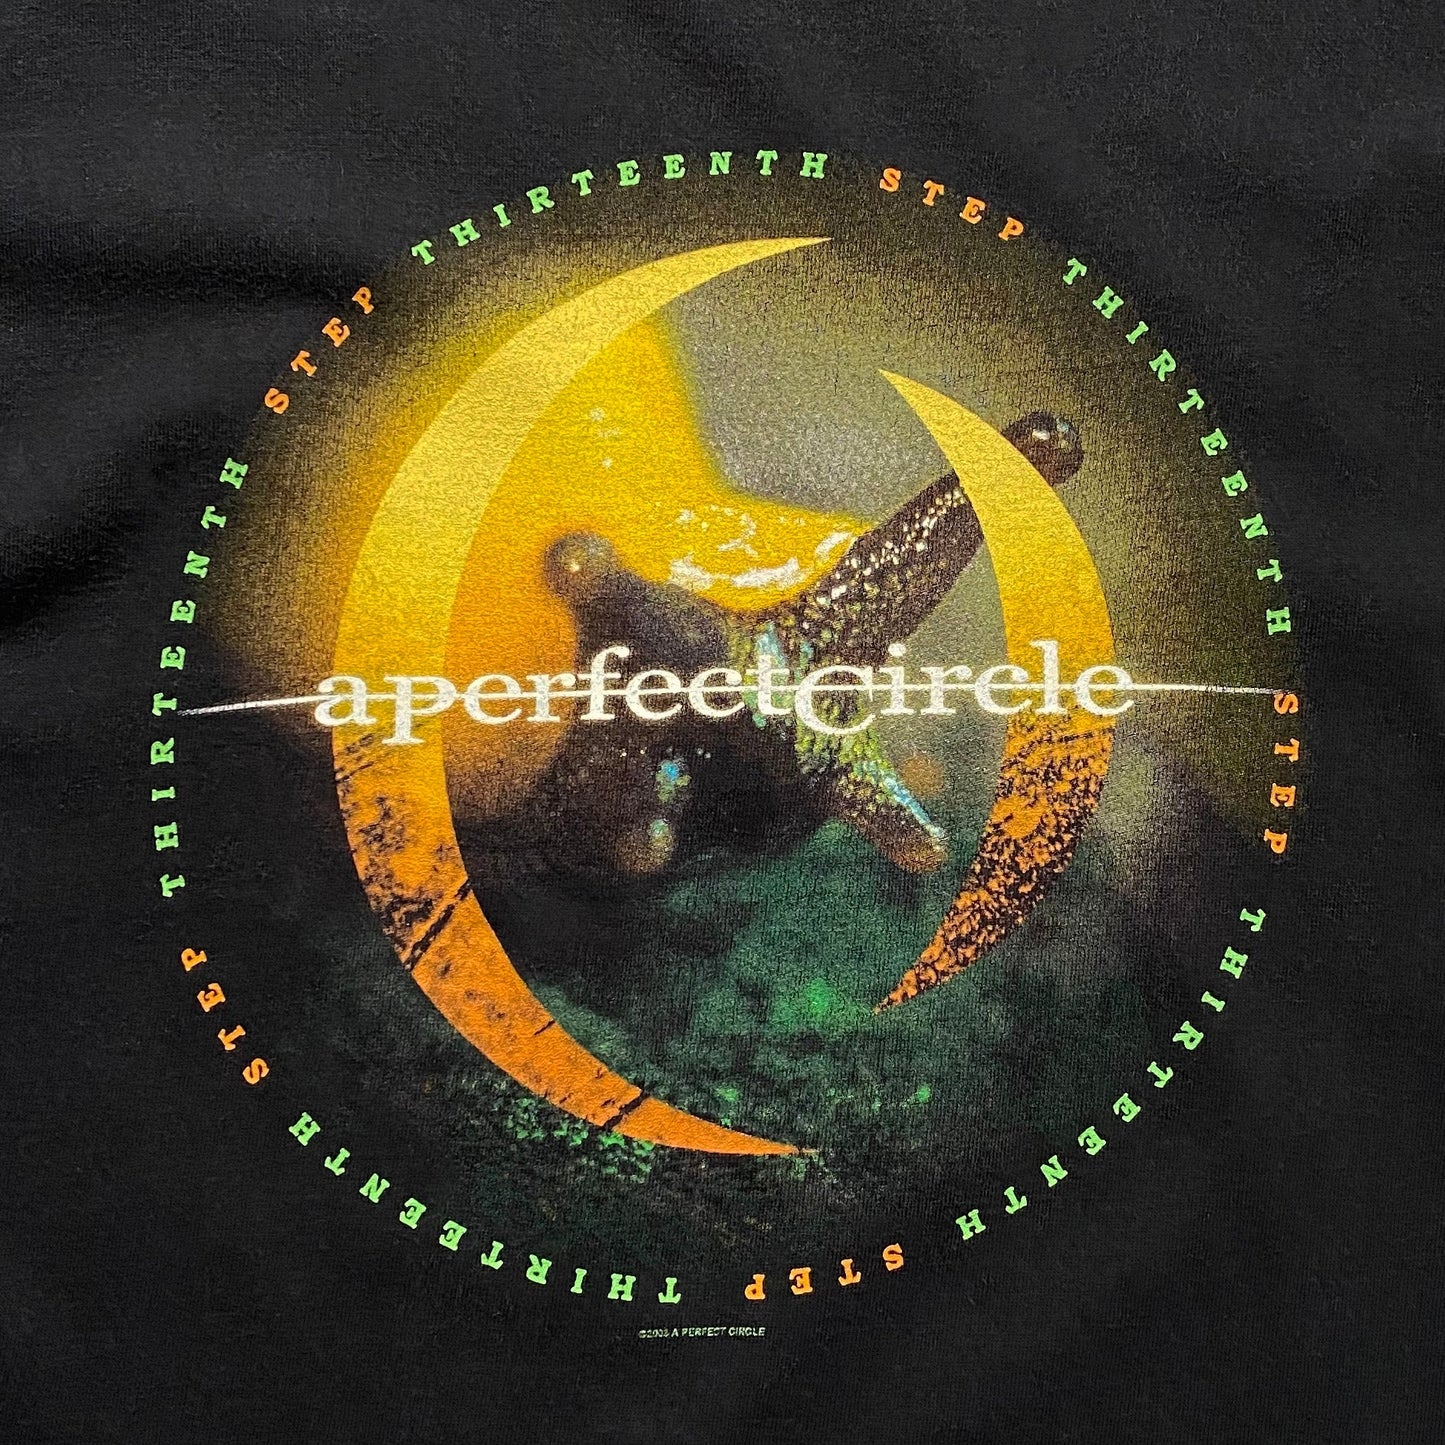 00's a perfect circle "OUR FIRST STEP WINTER 2004" TOUR T-SHIRT